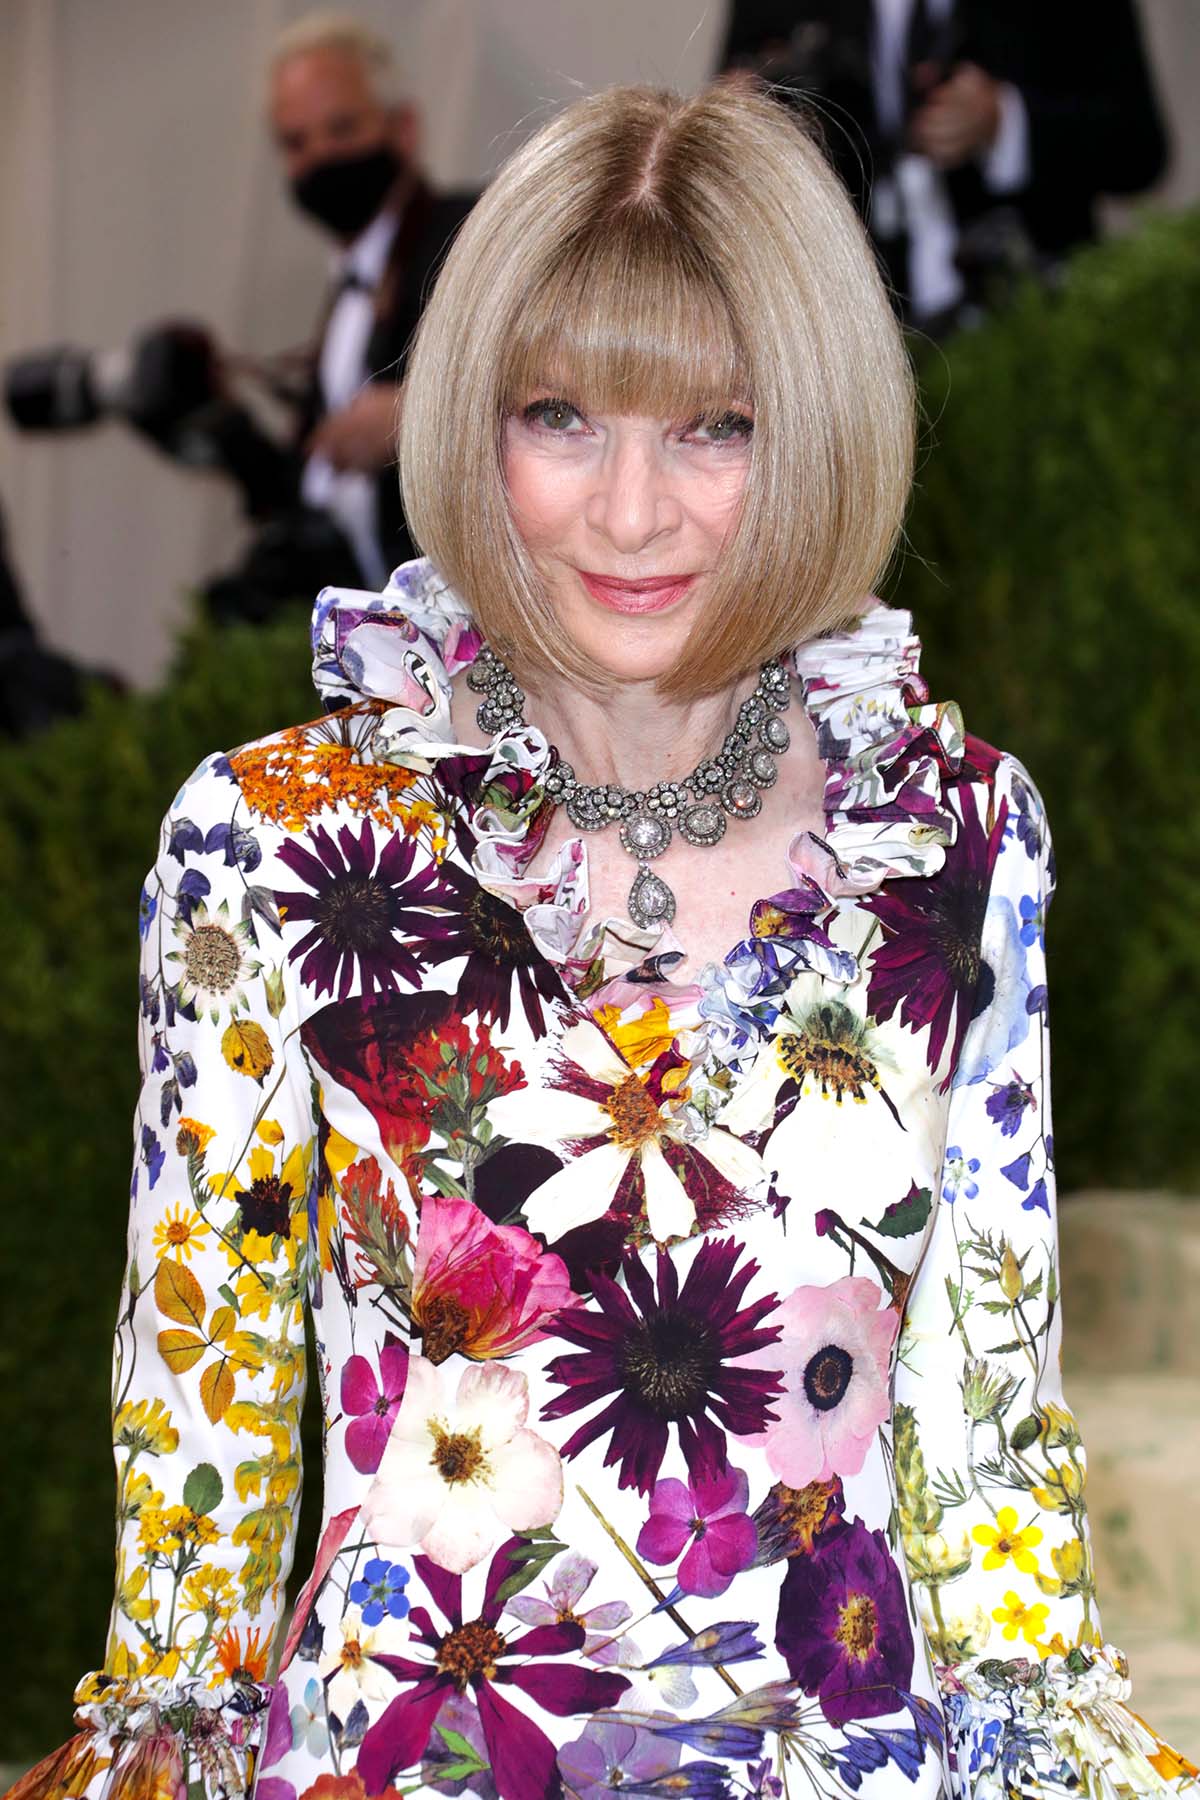 You Can Tell We're in a History-Making Era, Because Anna Wintour Just Posed  for a Picture Wearing Athleisure - Fashionista